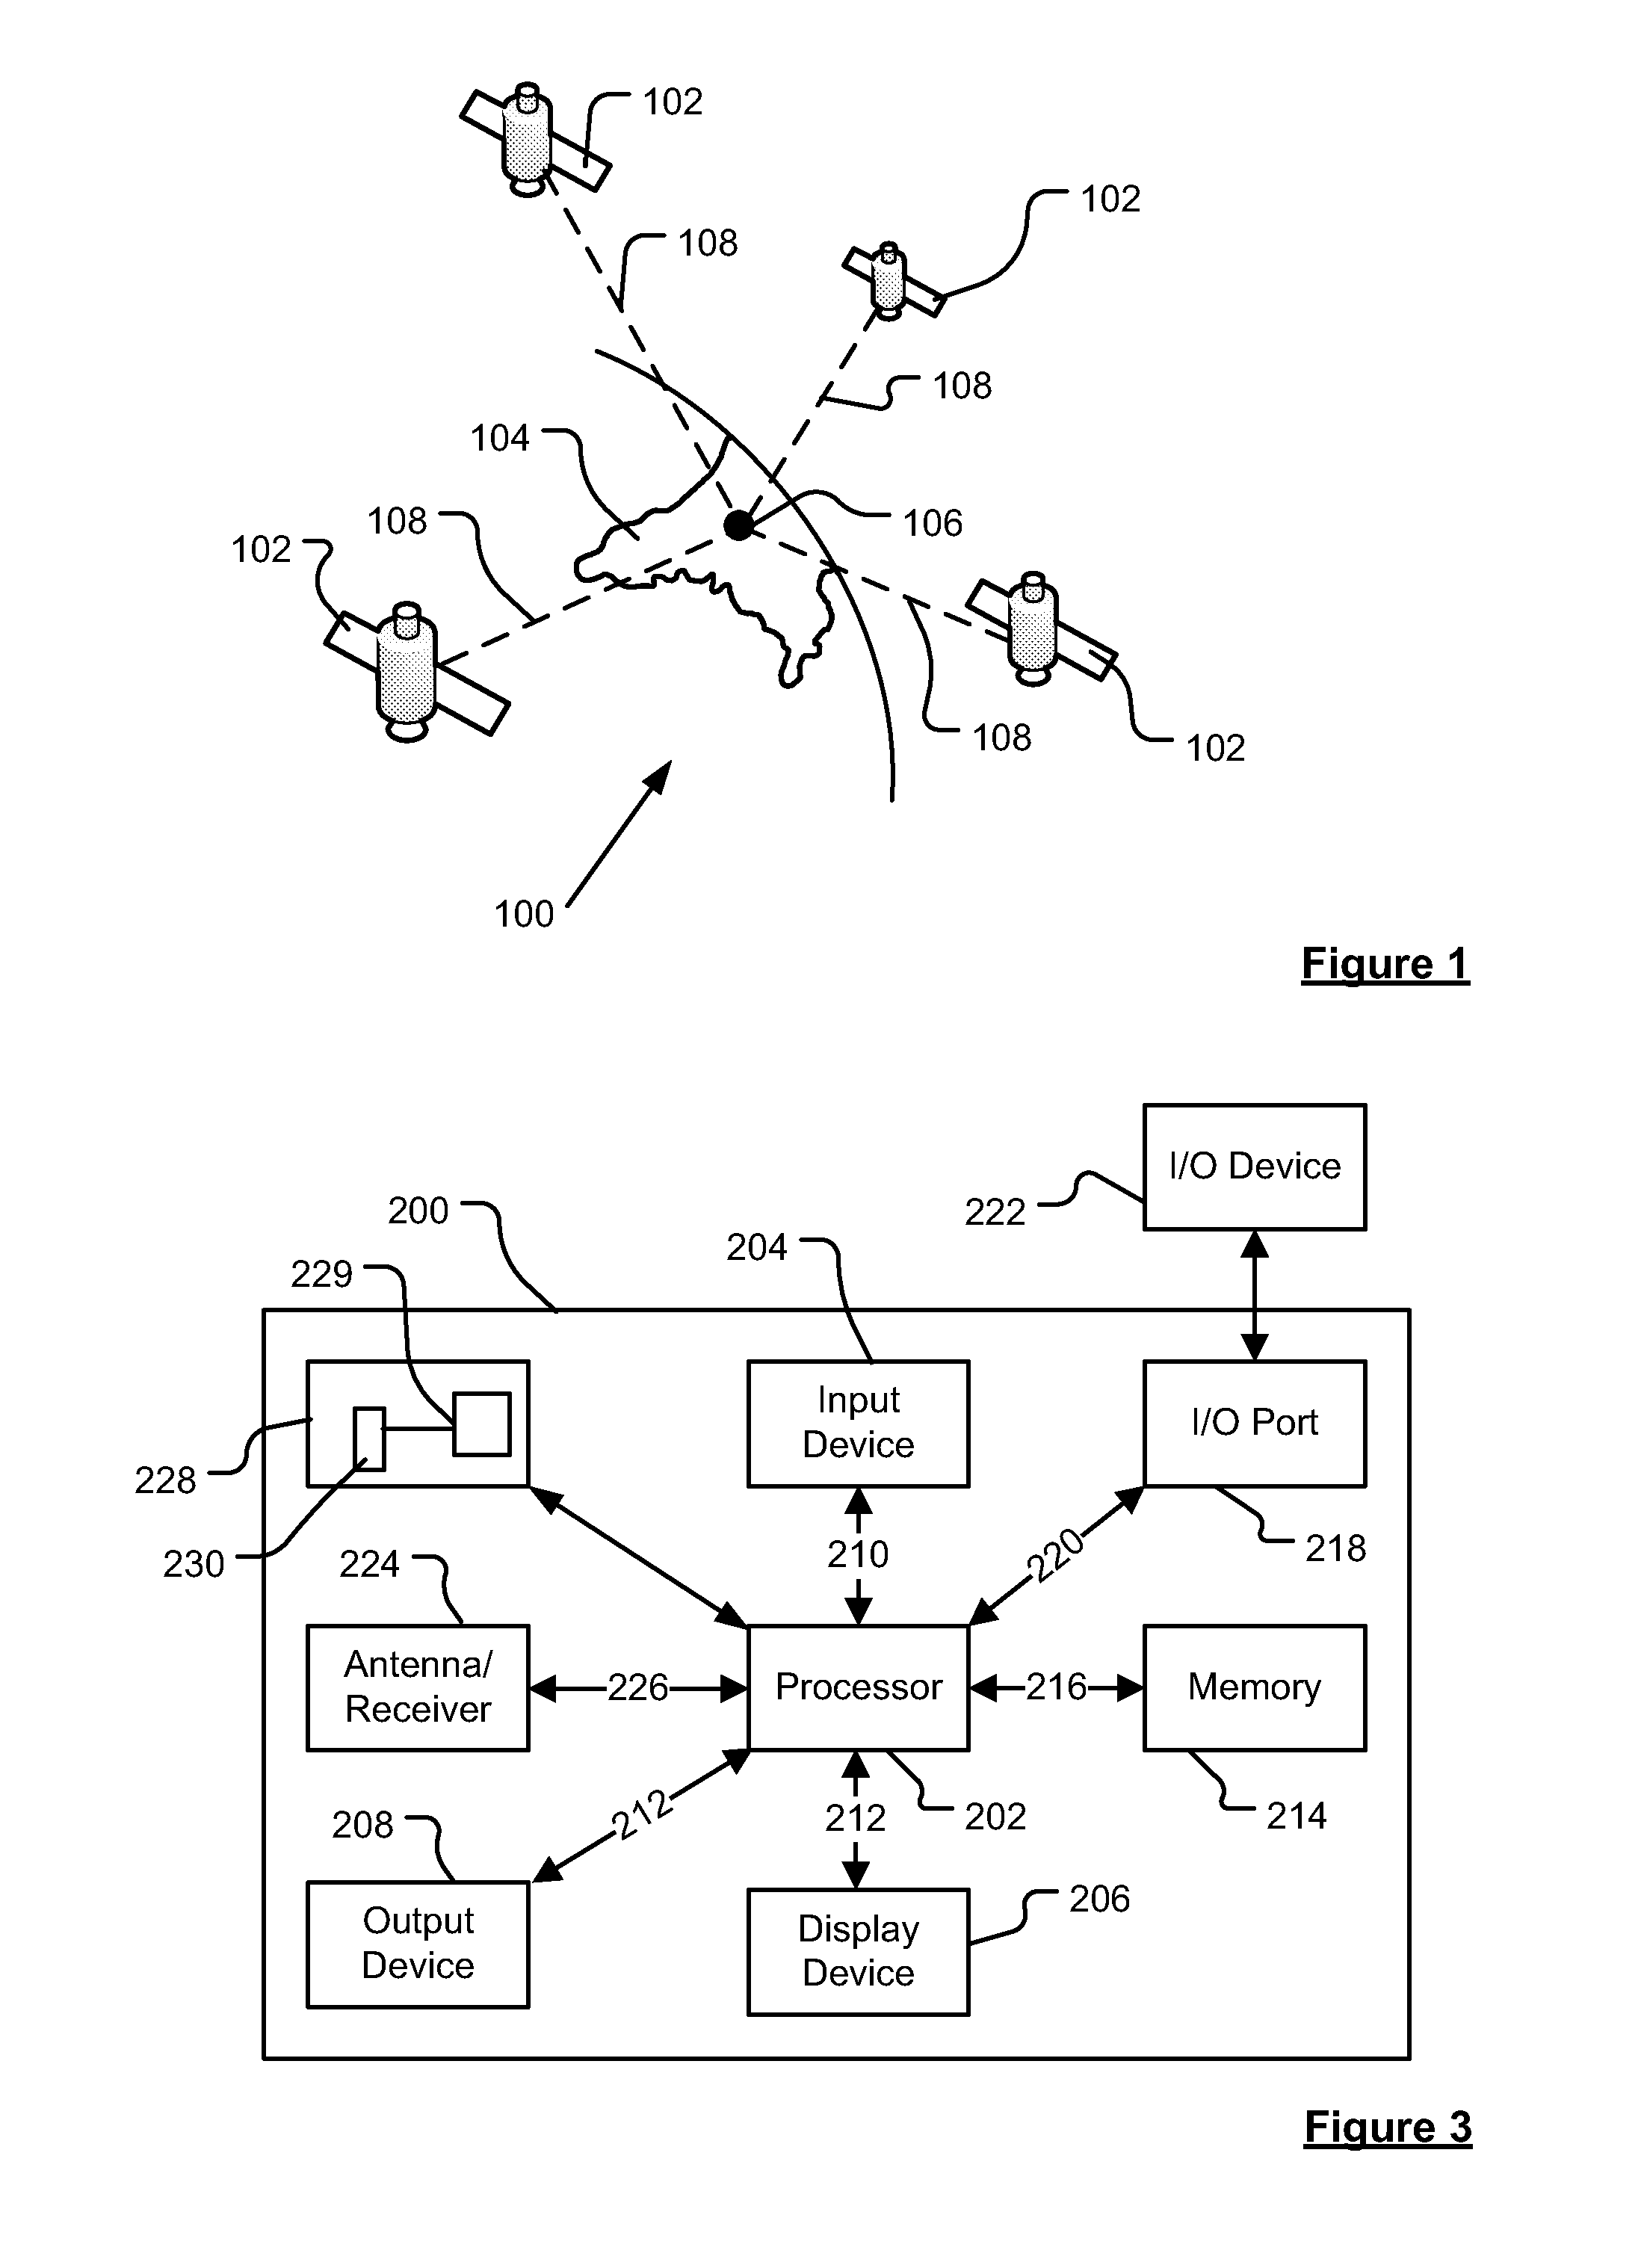 Method of identifying a temporarily located road feature, navigation apparatus, system for identifying a temporarily located road feature, and remote data processing server apparatus